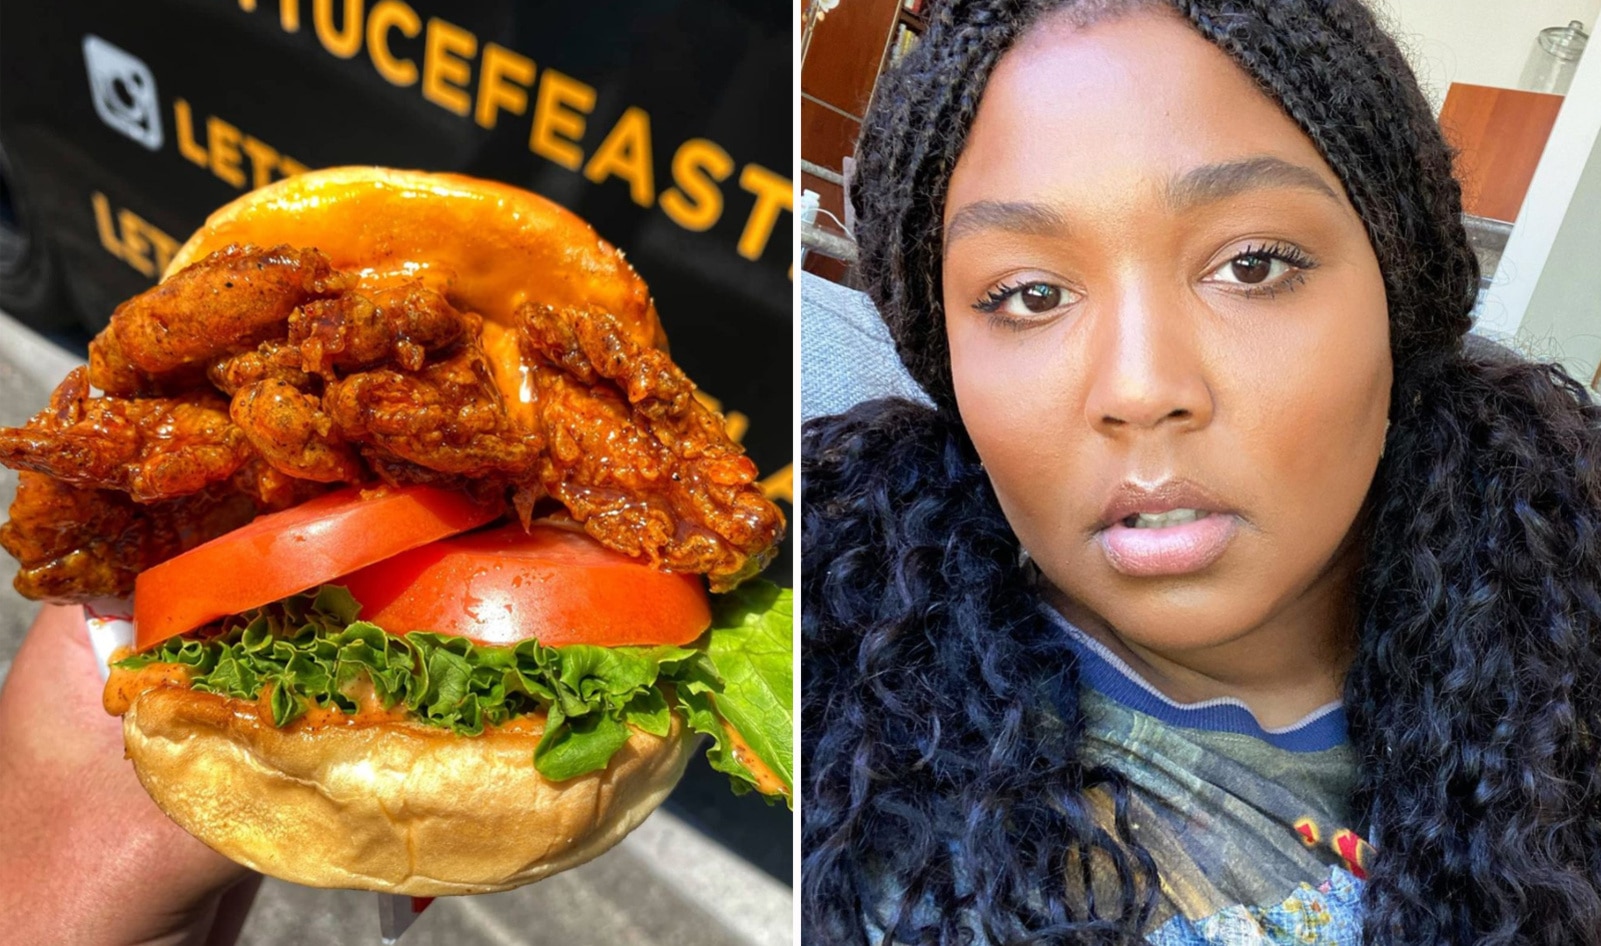 Lizzo's First 3-Minute TikTok Video Is Just Her Eating a Vegan Chicken Sandwich. And We're Here for It.&nbsp;